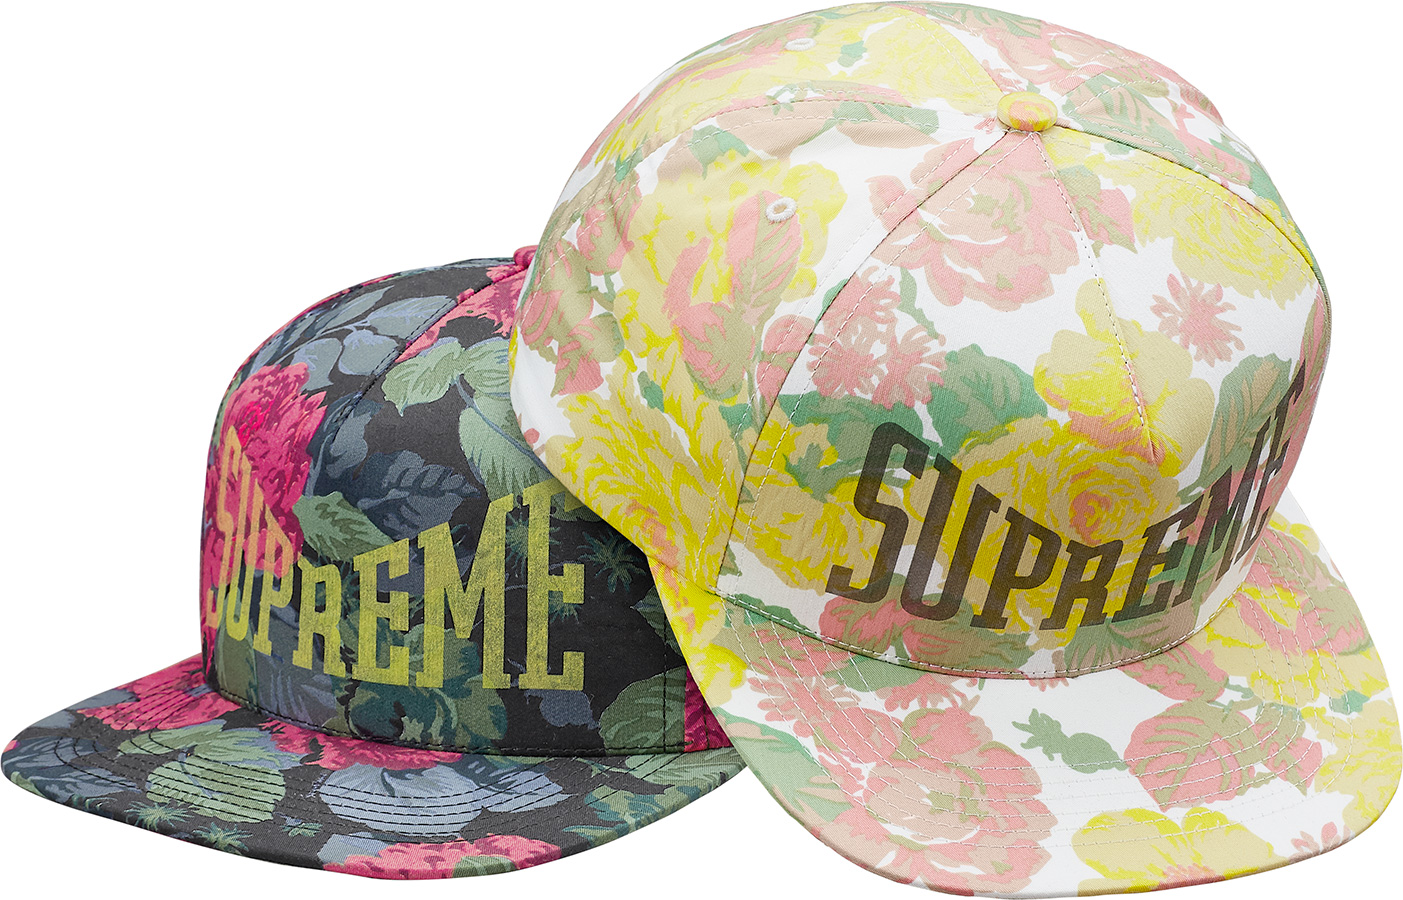 8 of Supreme's Best 5 Panels - Outsons